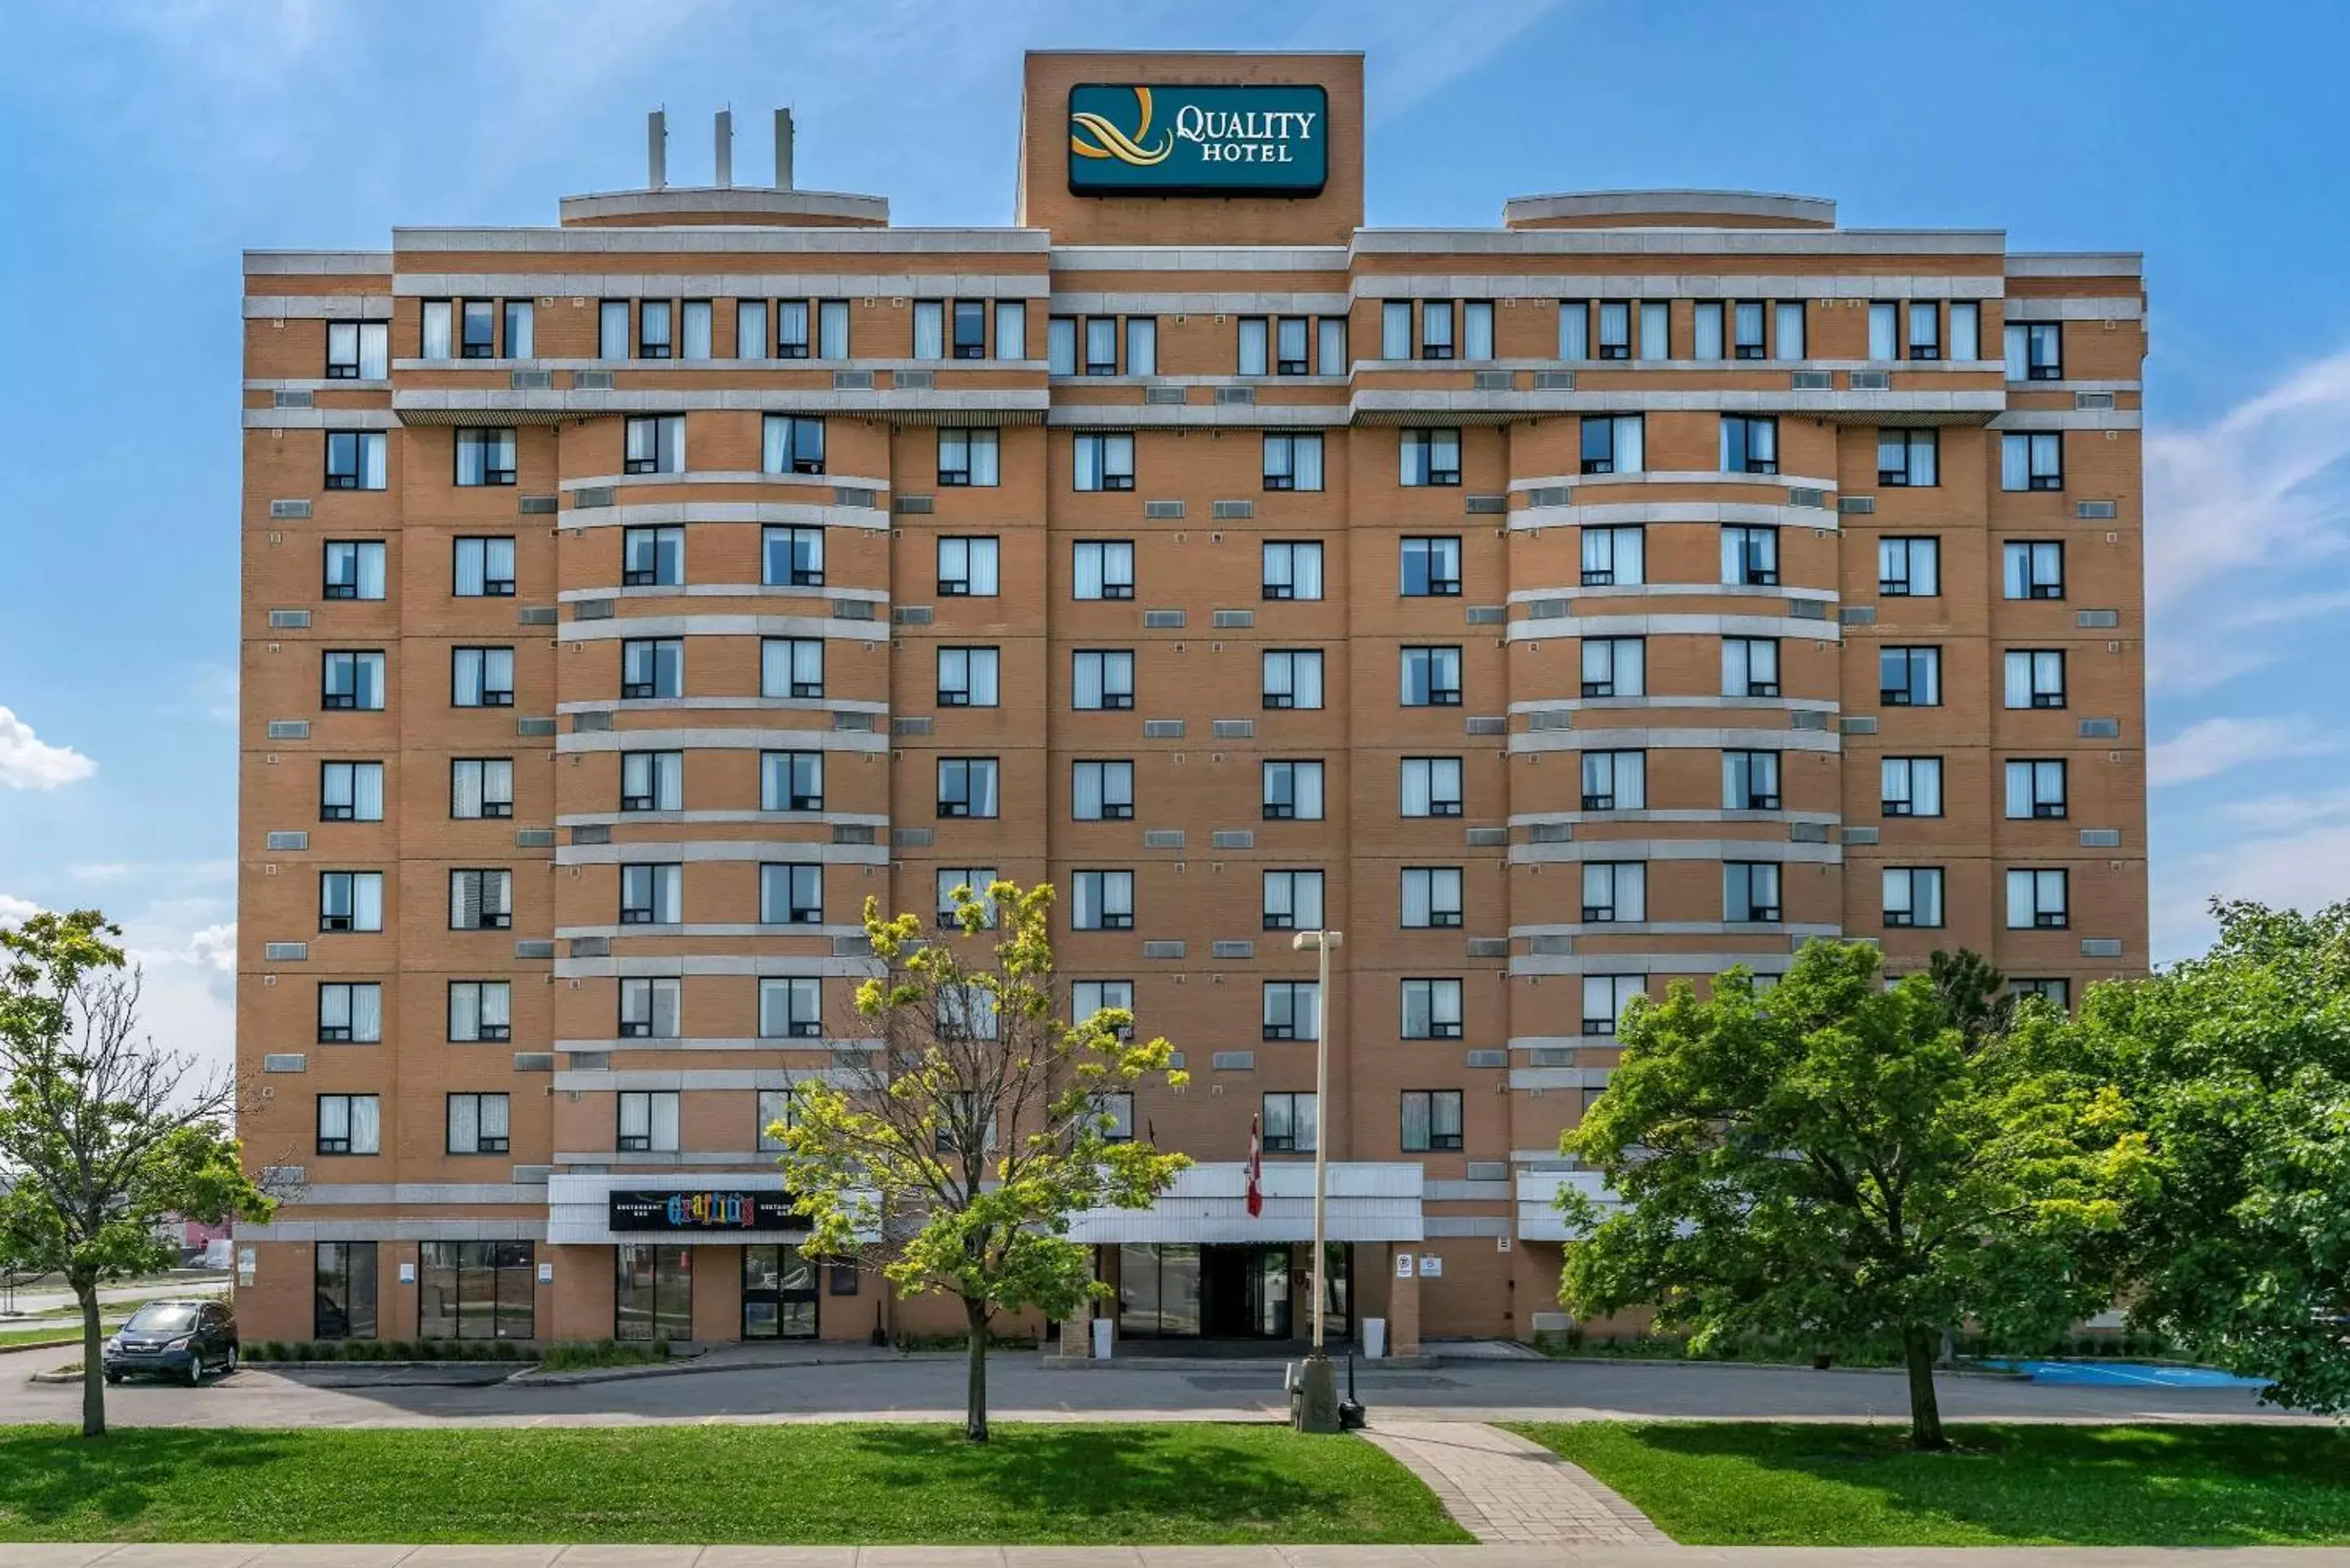 Property Building in Quality Inn and Suites Montreal East